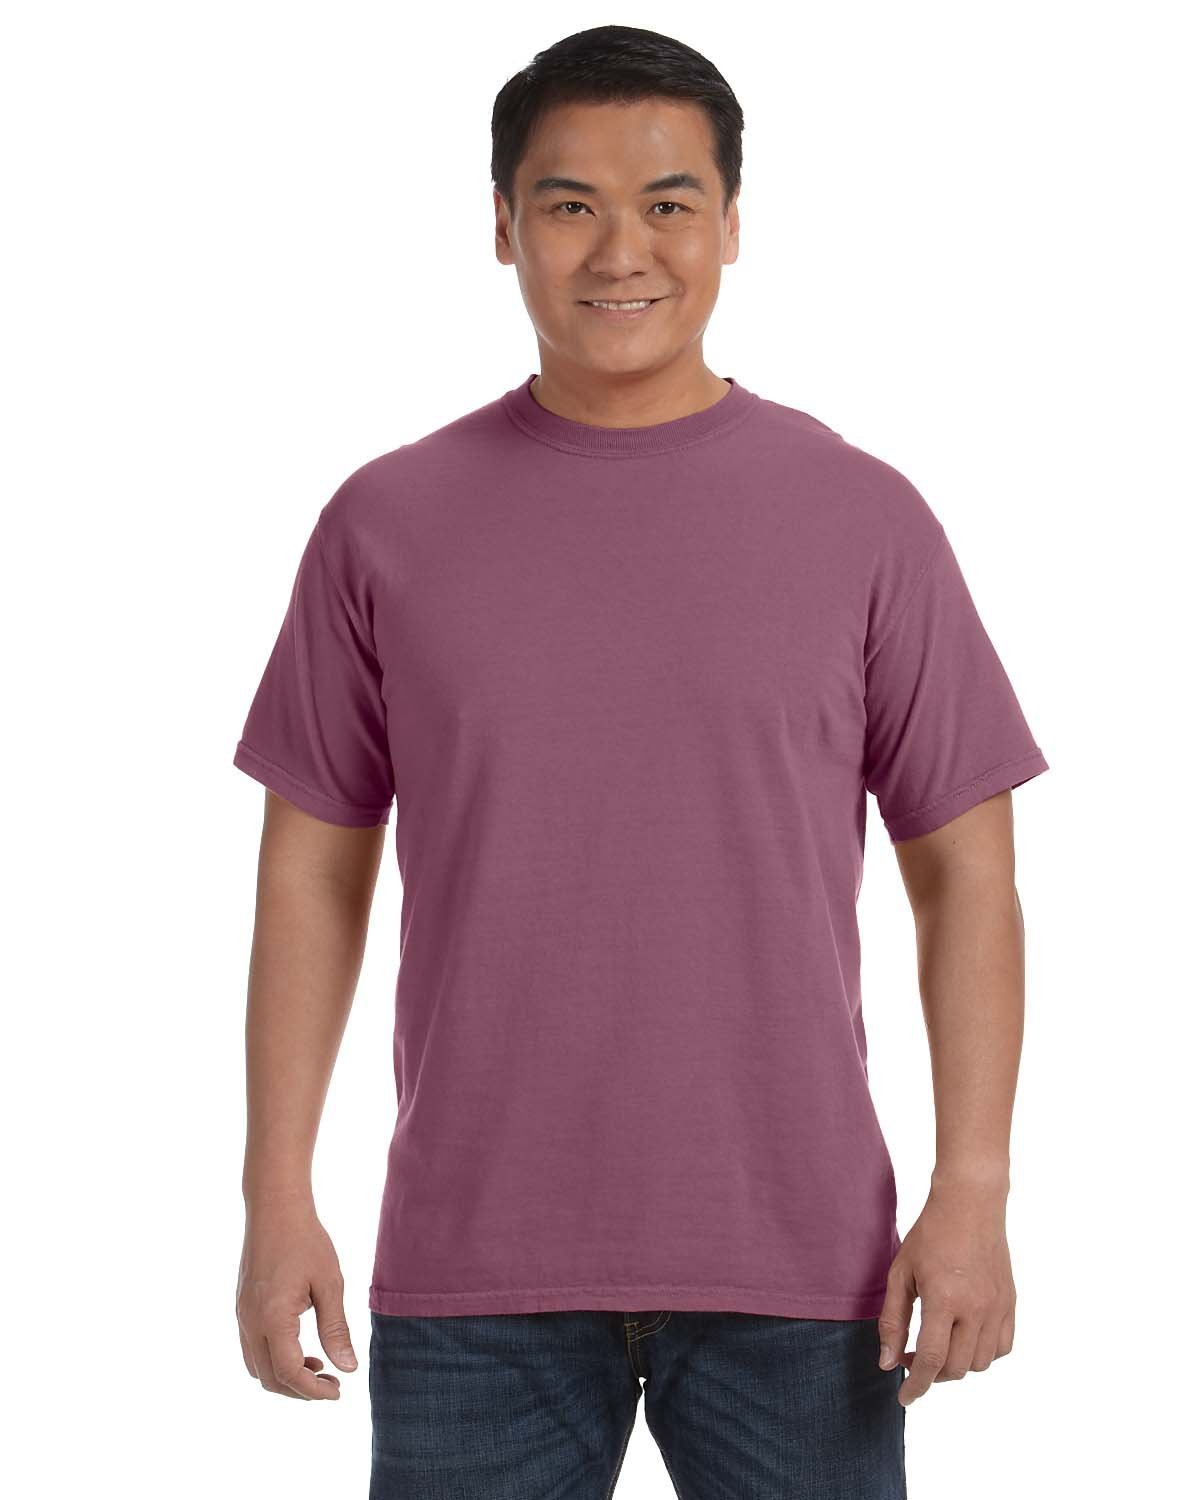 Comfort Colors Adult Heavyweight T-Shirt BERRY 